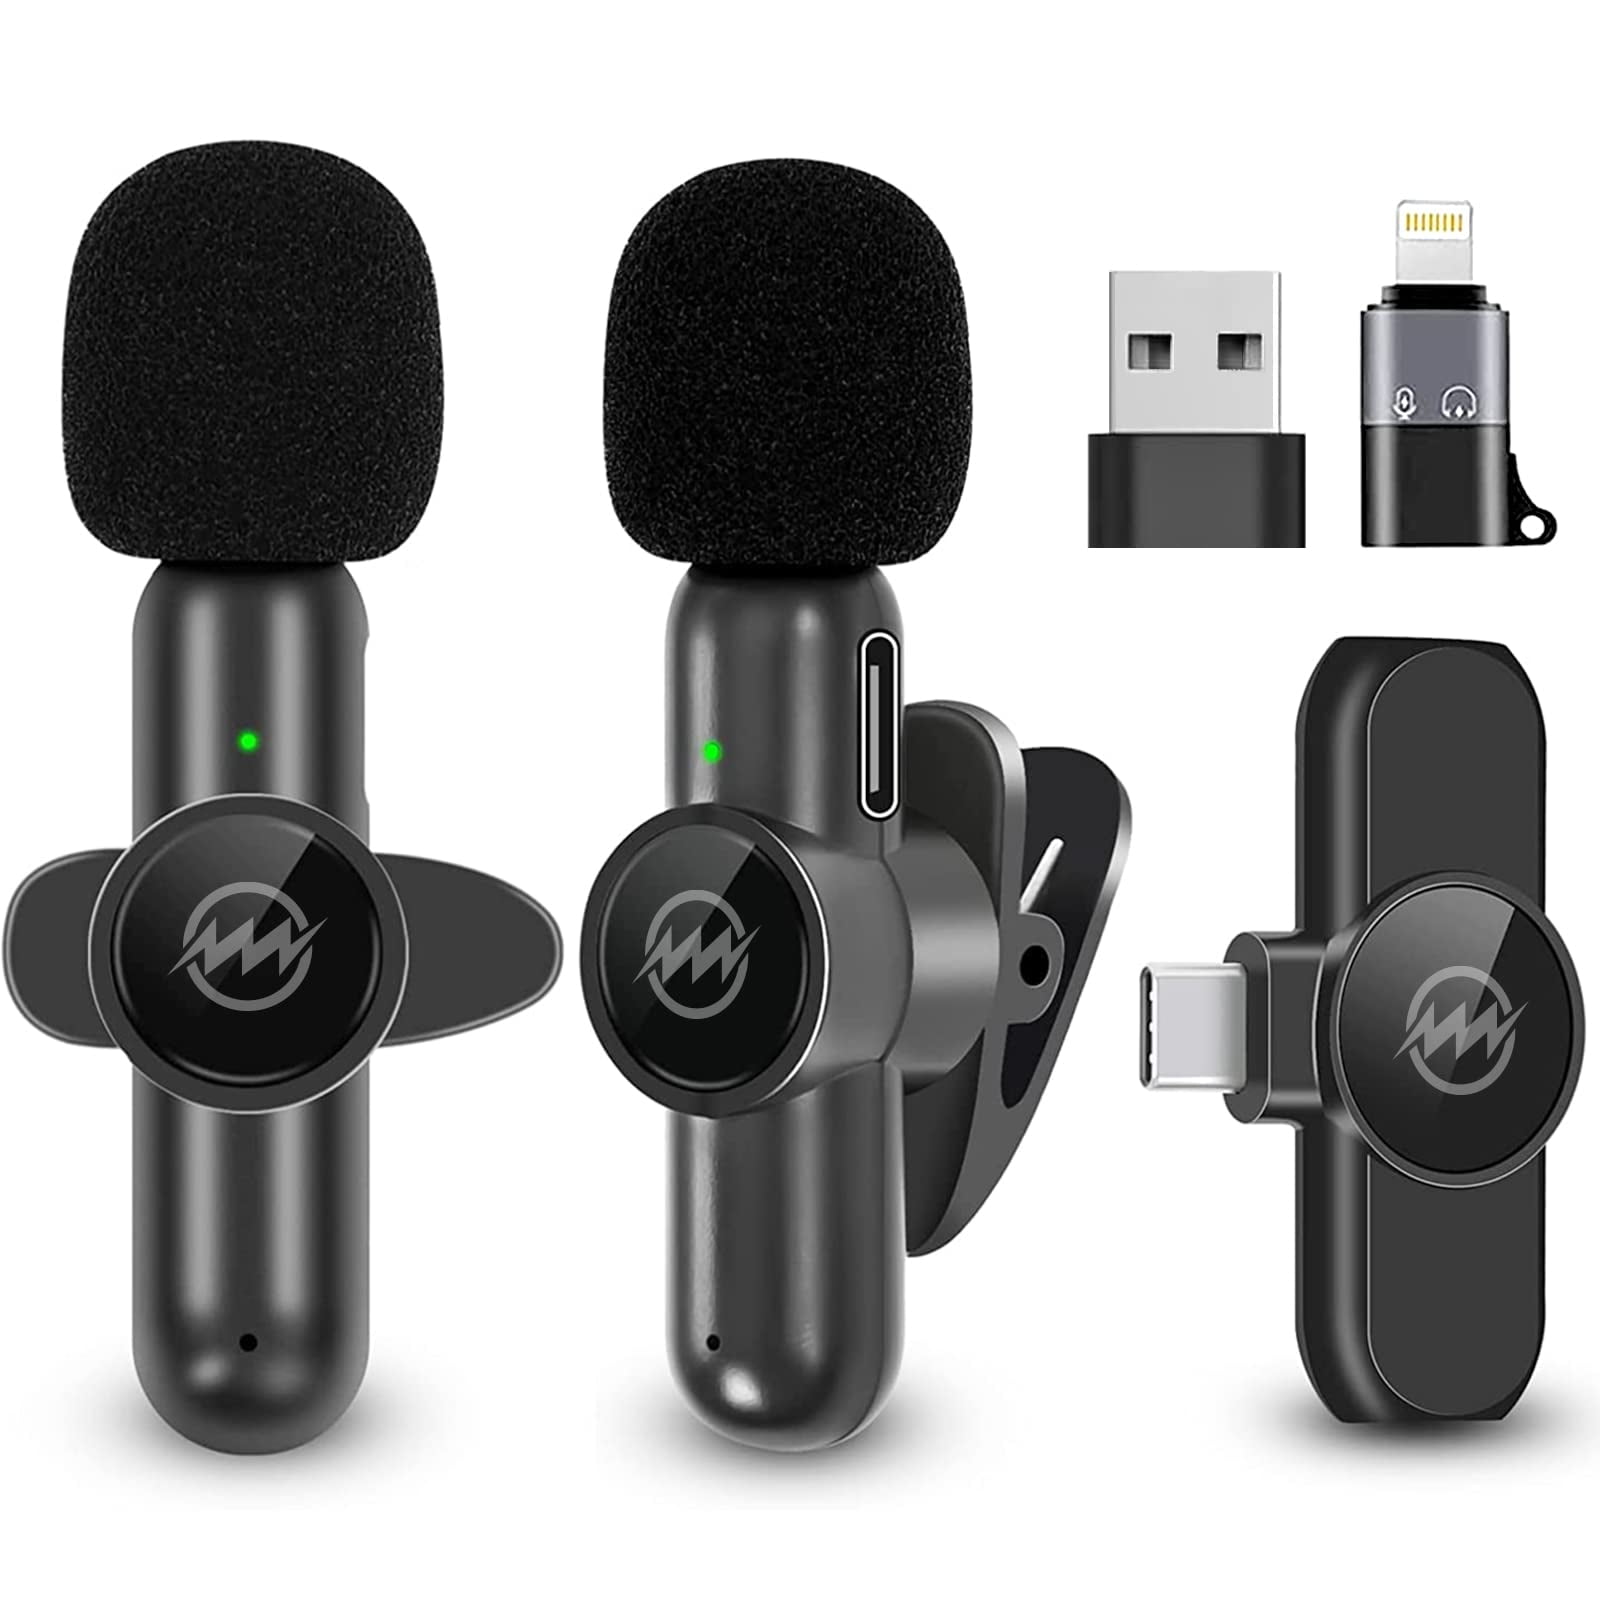 NEWWARE 2 Pack Wireless Lavalier Microphones for Android/iPhone/Computer/ Laptop,USB-C to USB Adaptor & Port,12H for 1 Person Use,Clip on Lapel for Video Recording Vlogging Podcast Tiktok - Walmart.com